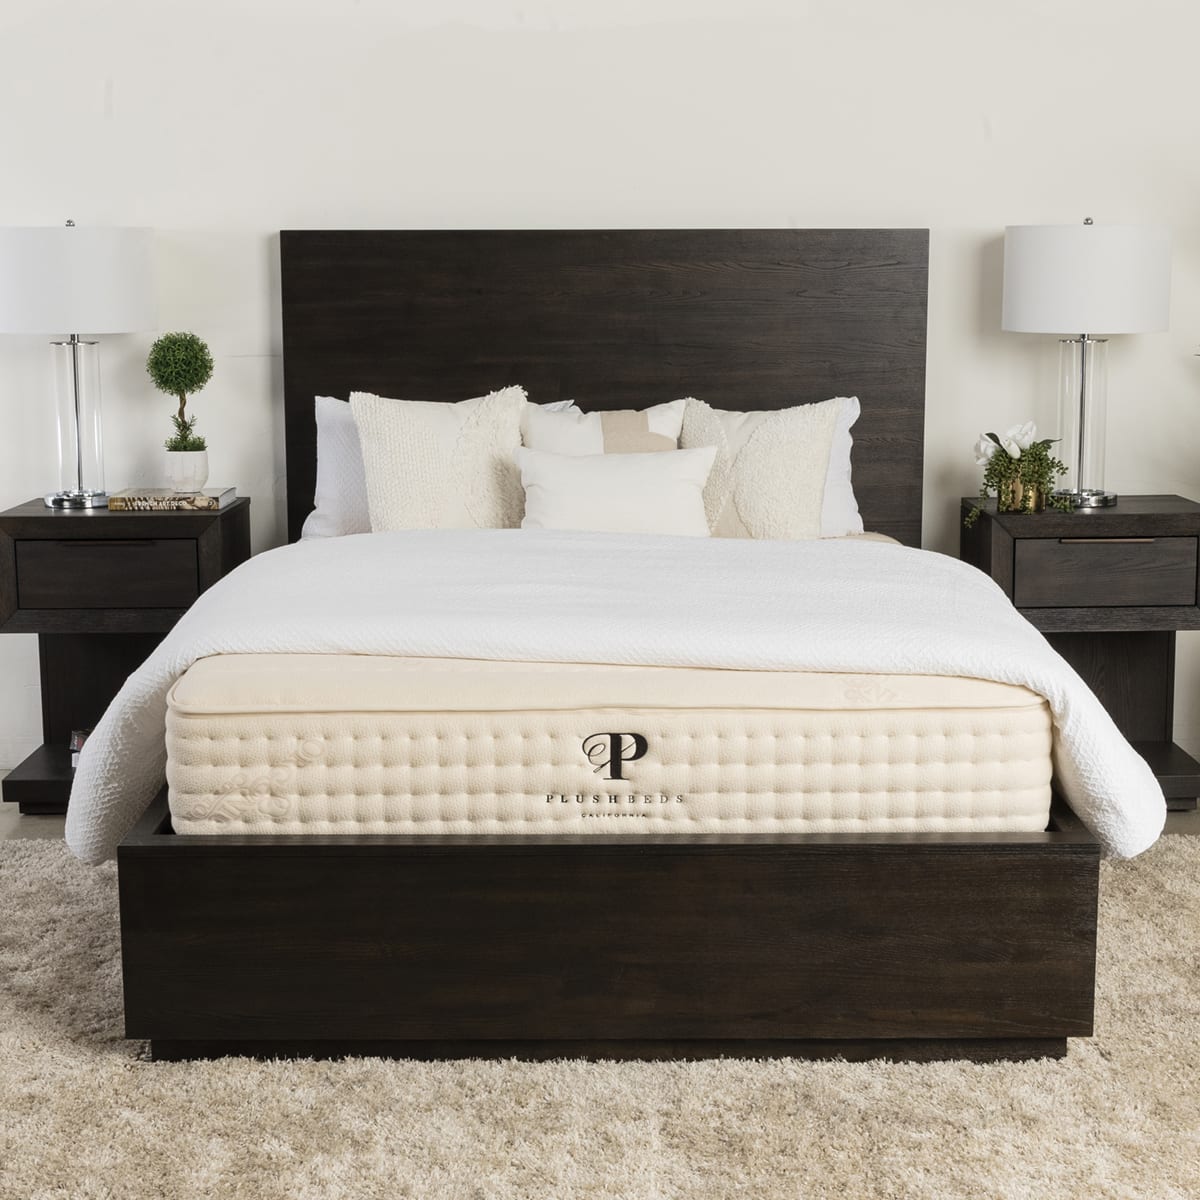 Why Is The Serenity By Tempur-pedic Memory Foam Mattress Topper Discontinued